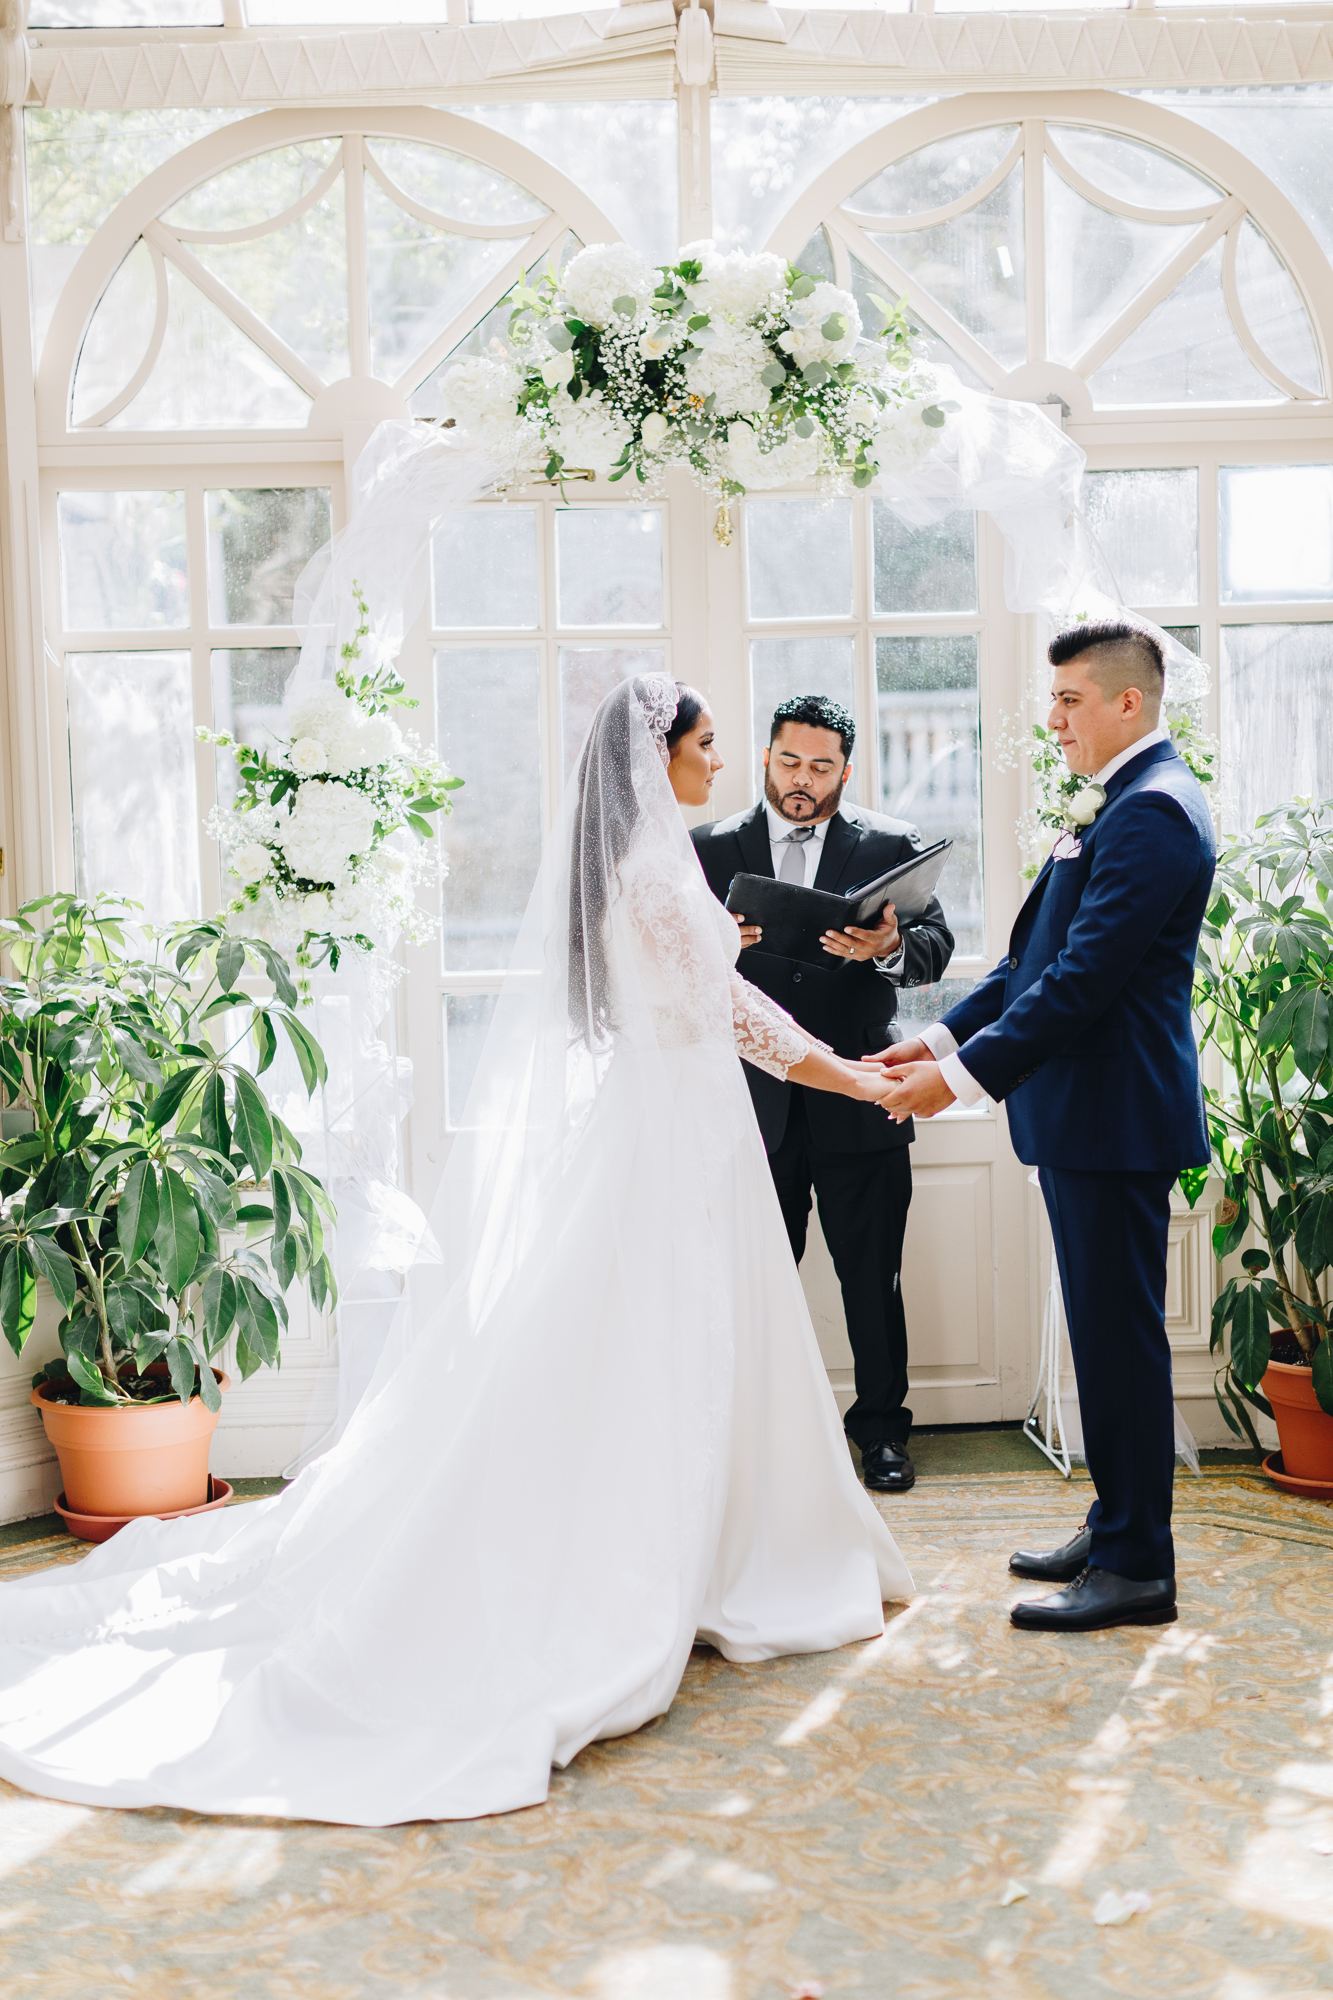 Wedding ceremony with arch at the Brownstone in New Jersey